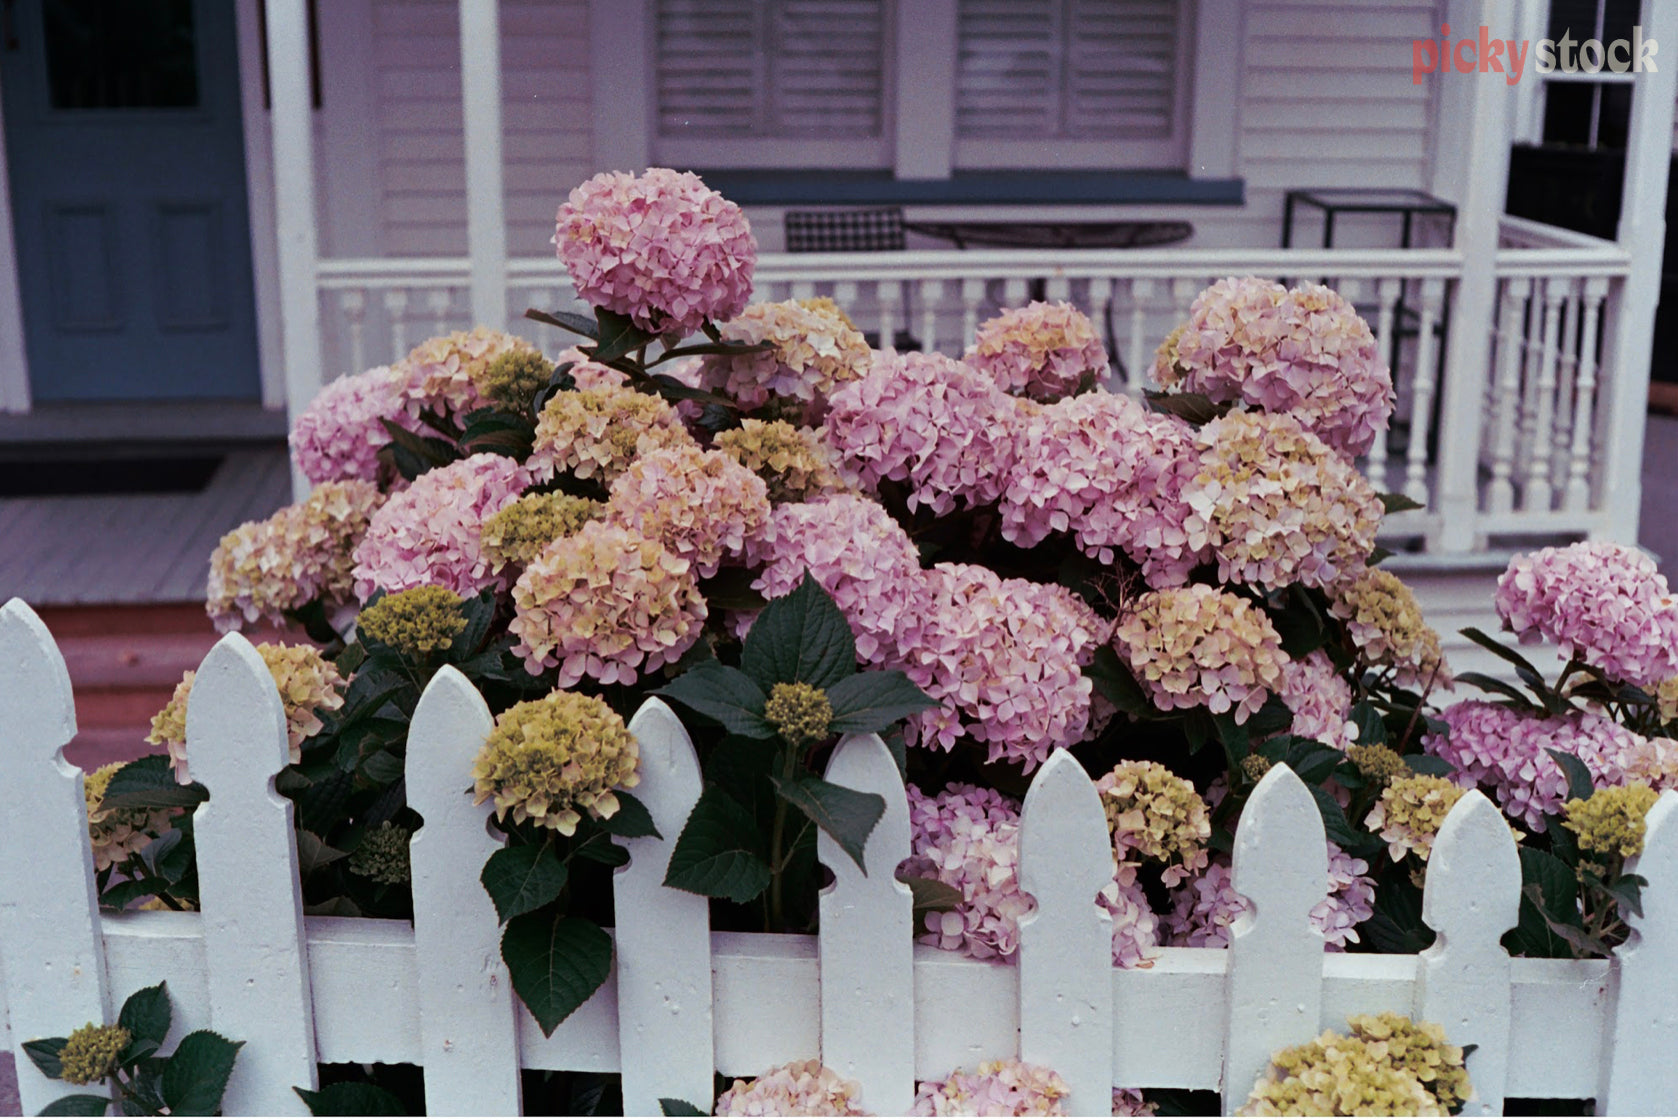 A landscape of a blooming hydrangea plant behind a white picket fence and in front of a whitewashed cottage.